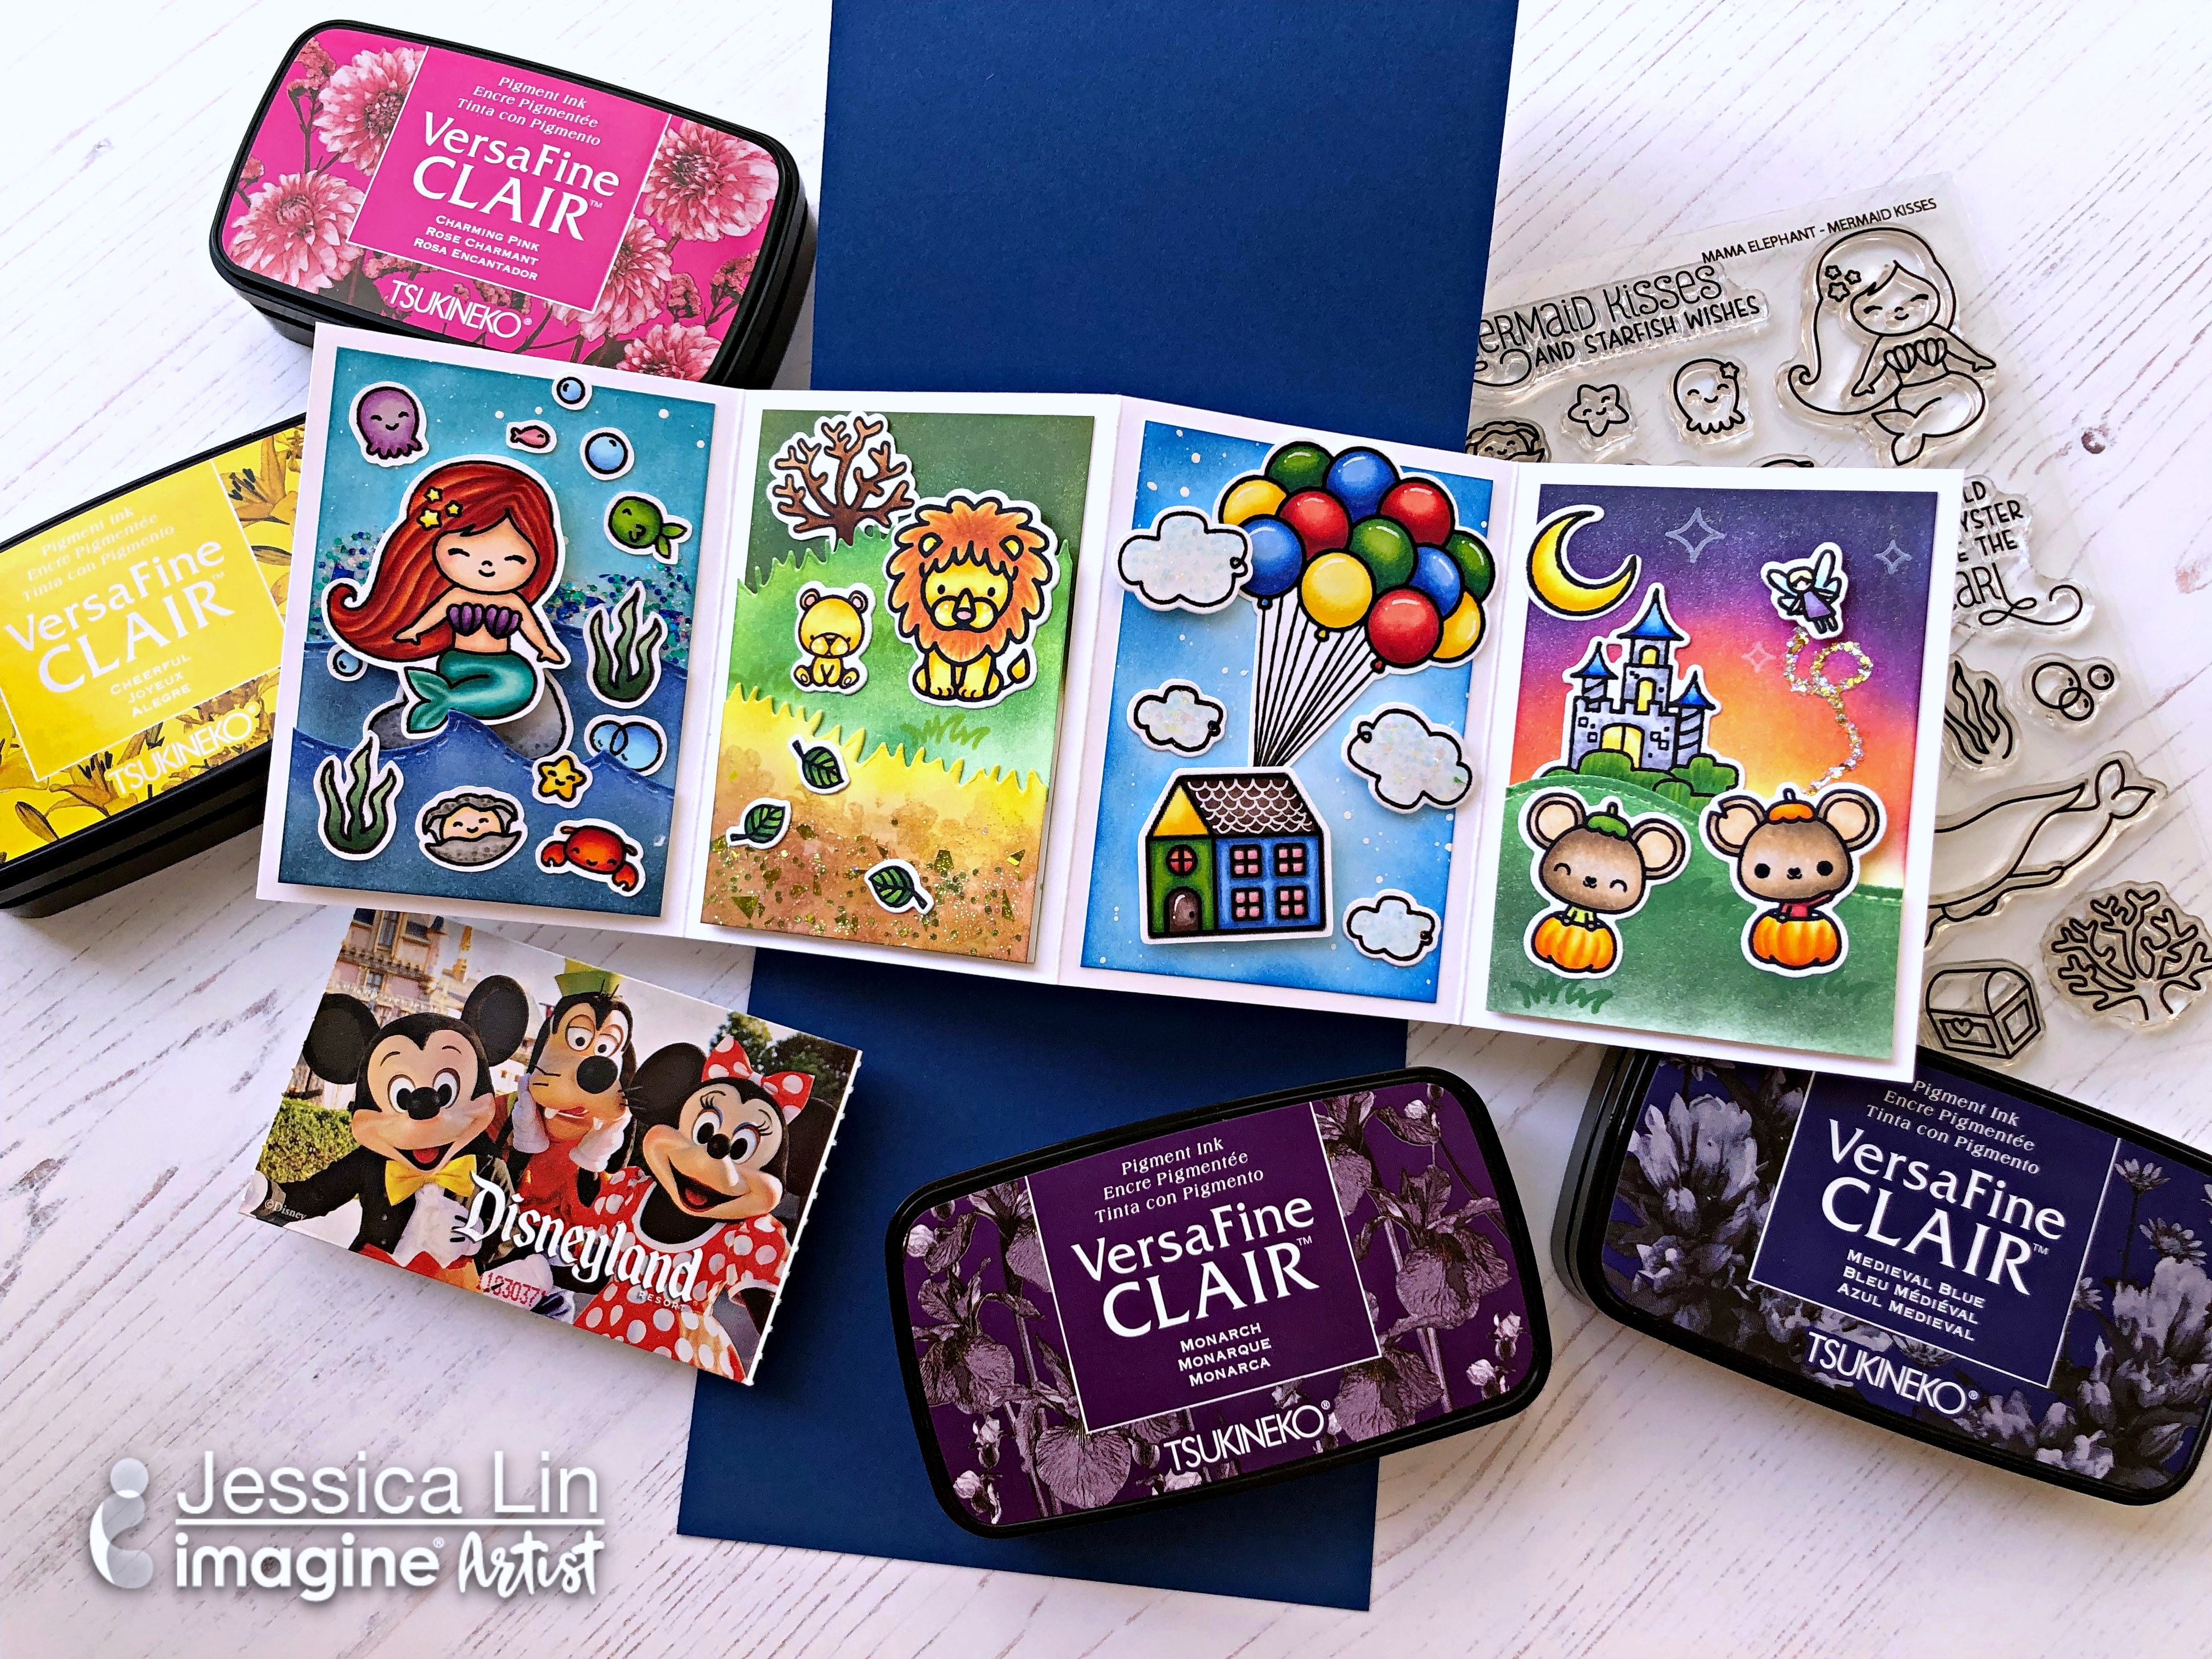 Handmade twist and pop 3D Disney Memory card with blended backgrounds made with VersaFine Clair ink.